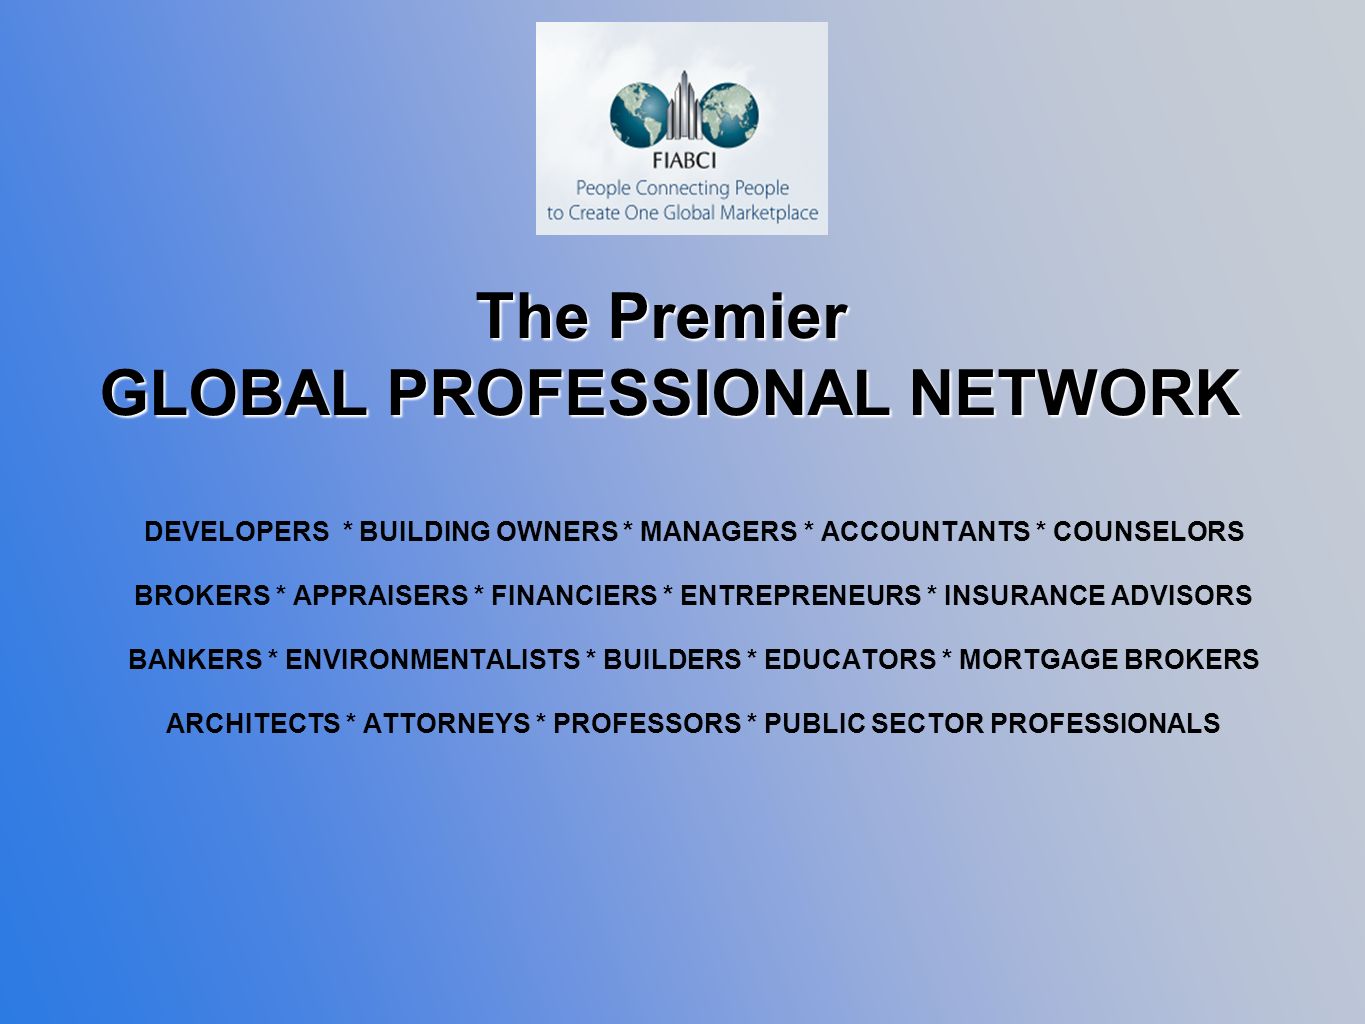 DEVELOPERS * BUILDING OWNERS * MANAGERS * ACCOUNTANTS * COUNSELORS BROKERS * APPRAISERS * FINANCIERS * ENTREPRENEURS * INSURANCE ADVISORS BANKERS * ENVIRONMENTALISTS * BUILDERS * EDUCATORS * MORTGAGE BROKERS ARCHITECTS * ATTORNEYS * PROFESSORS * PUBLIC SECTOR PROFESSIONALS The Premier GLOBAL PROFESSIONAL NETWORK